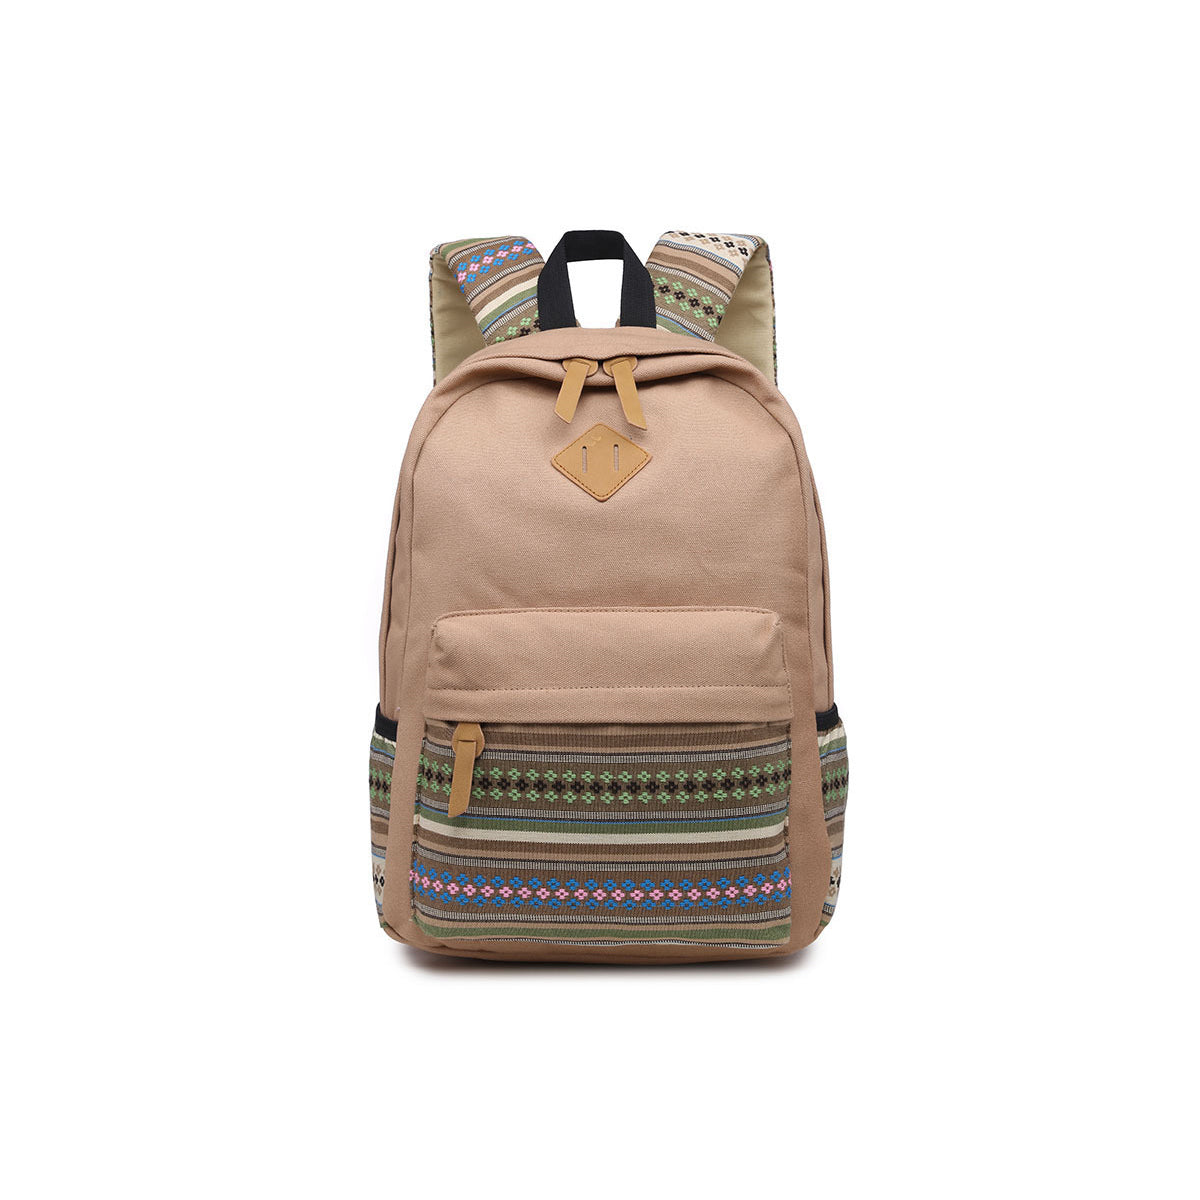 Casual Style Lightweight Canvas Backpack School Bag Travel Daypack